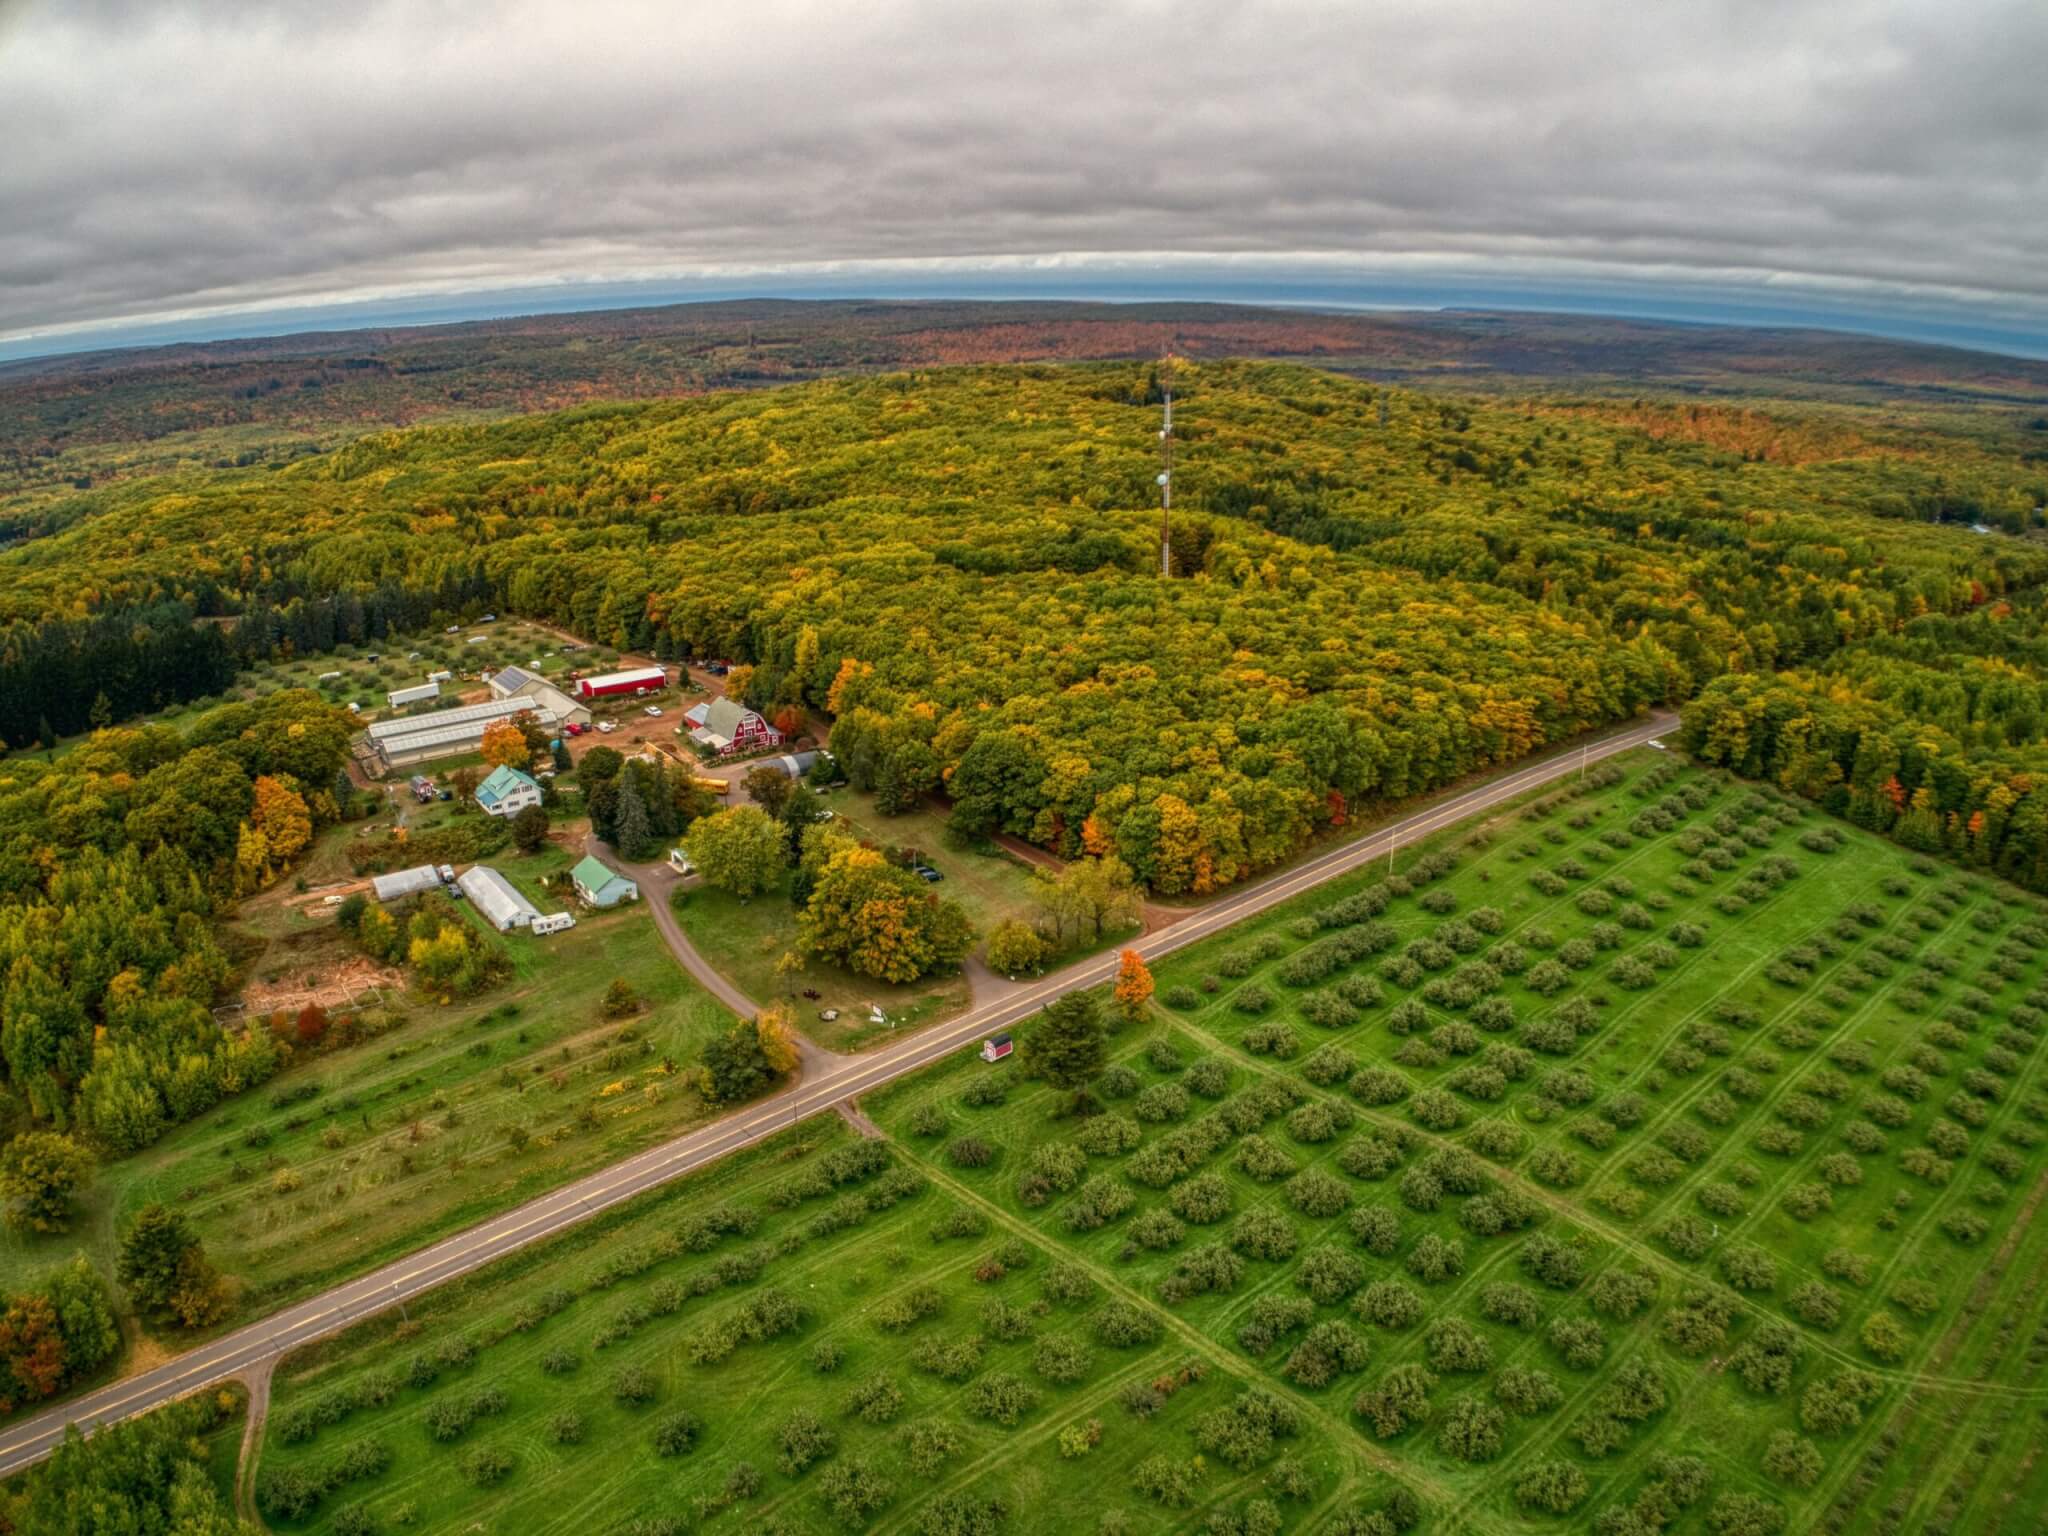 Aerial View of an Apple Orchard near Bayfield, Wisconsin during Autumn